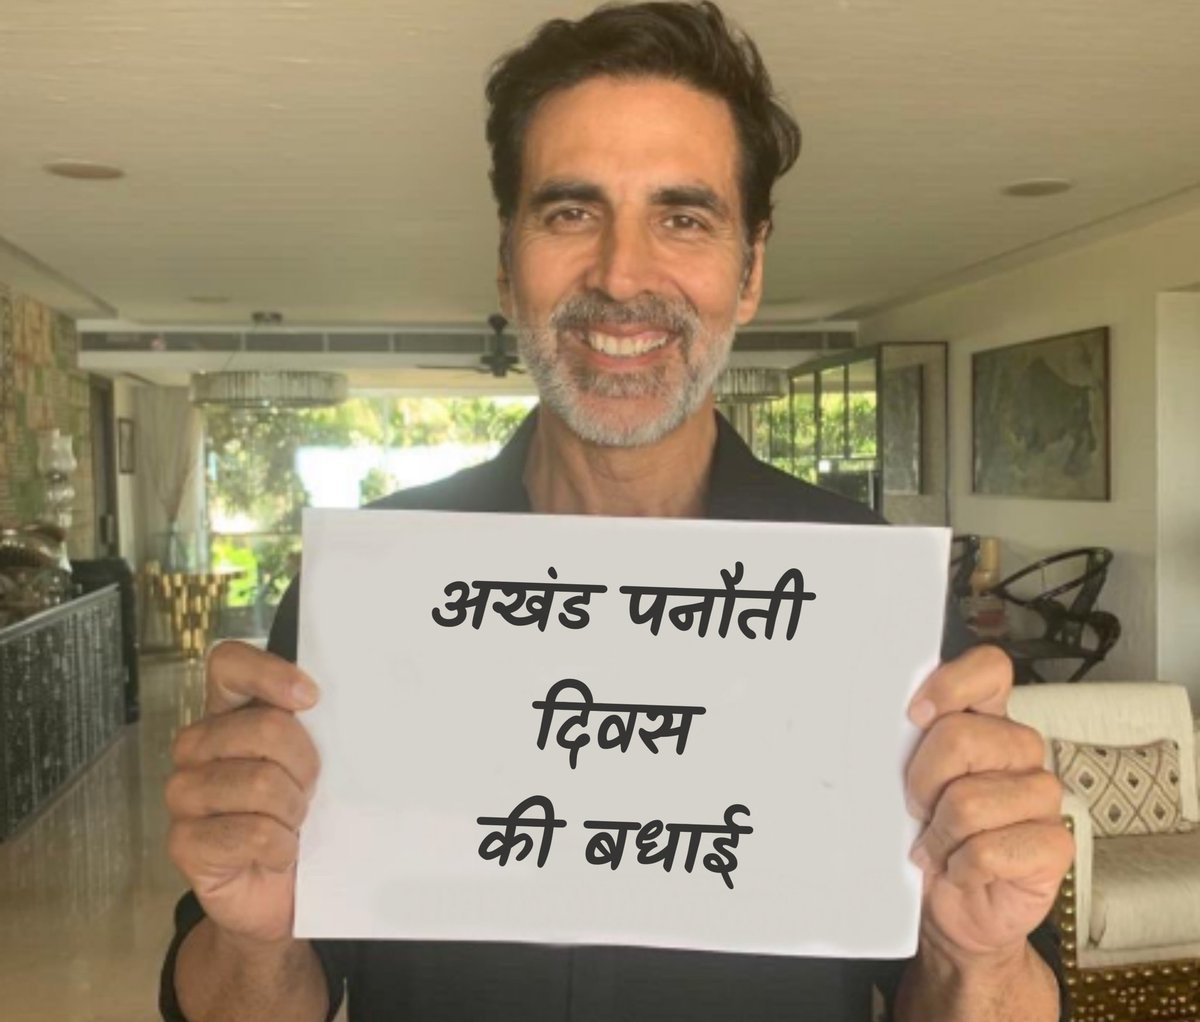 When did this happen, 🤦 Can Akshay Kumar also do like this? We strongly condemn this picture #राष्ट्रीय_बेरोजगार_दिवस #NationalUnemploymentDay #मोदी_आया_बेरोजगारी_लाया #HappyBdayModiji 😂